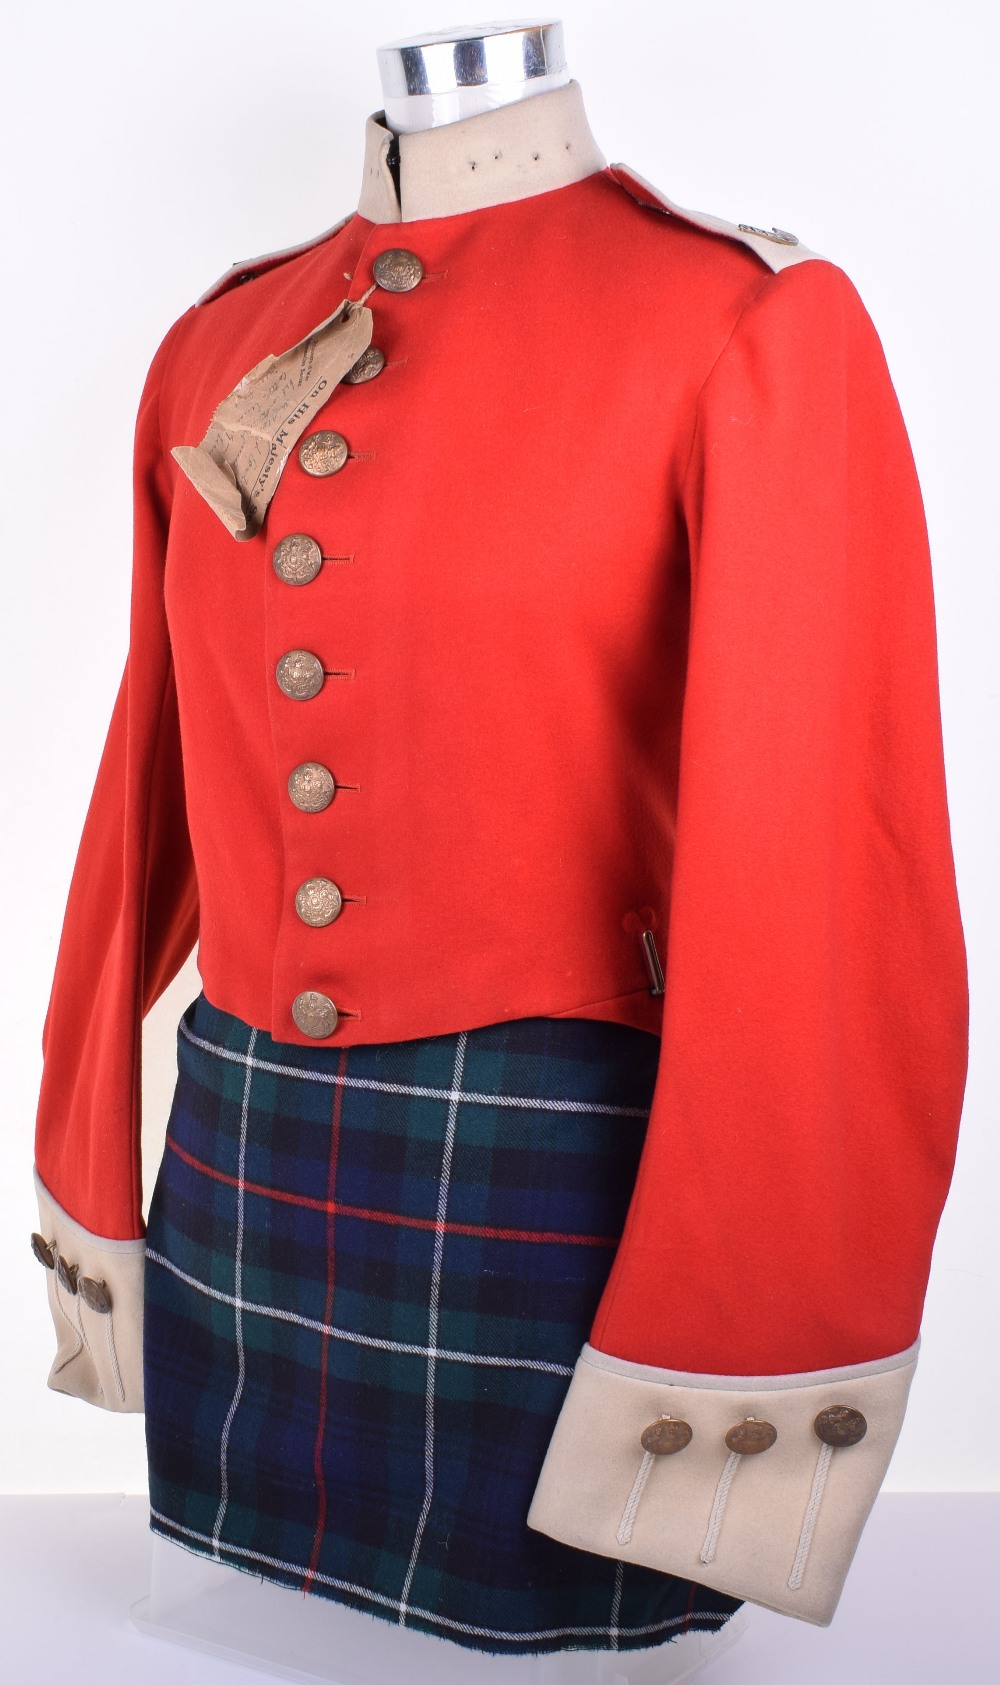 Seaforth Highlanders Experimental Tunic, of red scarlet cloth with white buff stand up collar, - Image 3 of 7